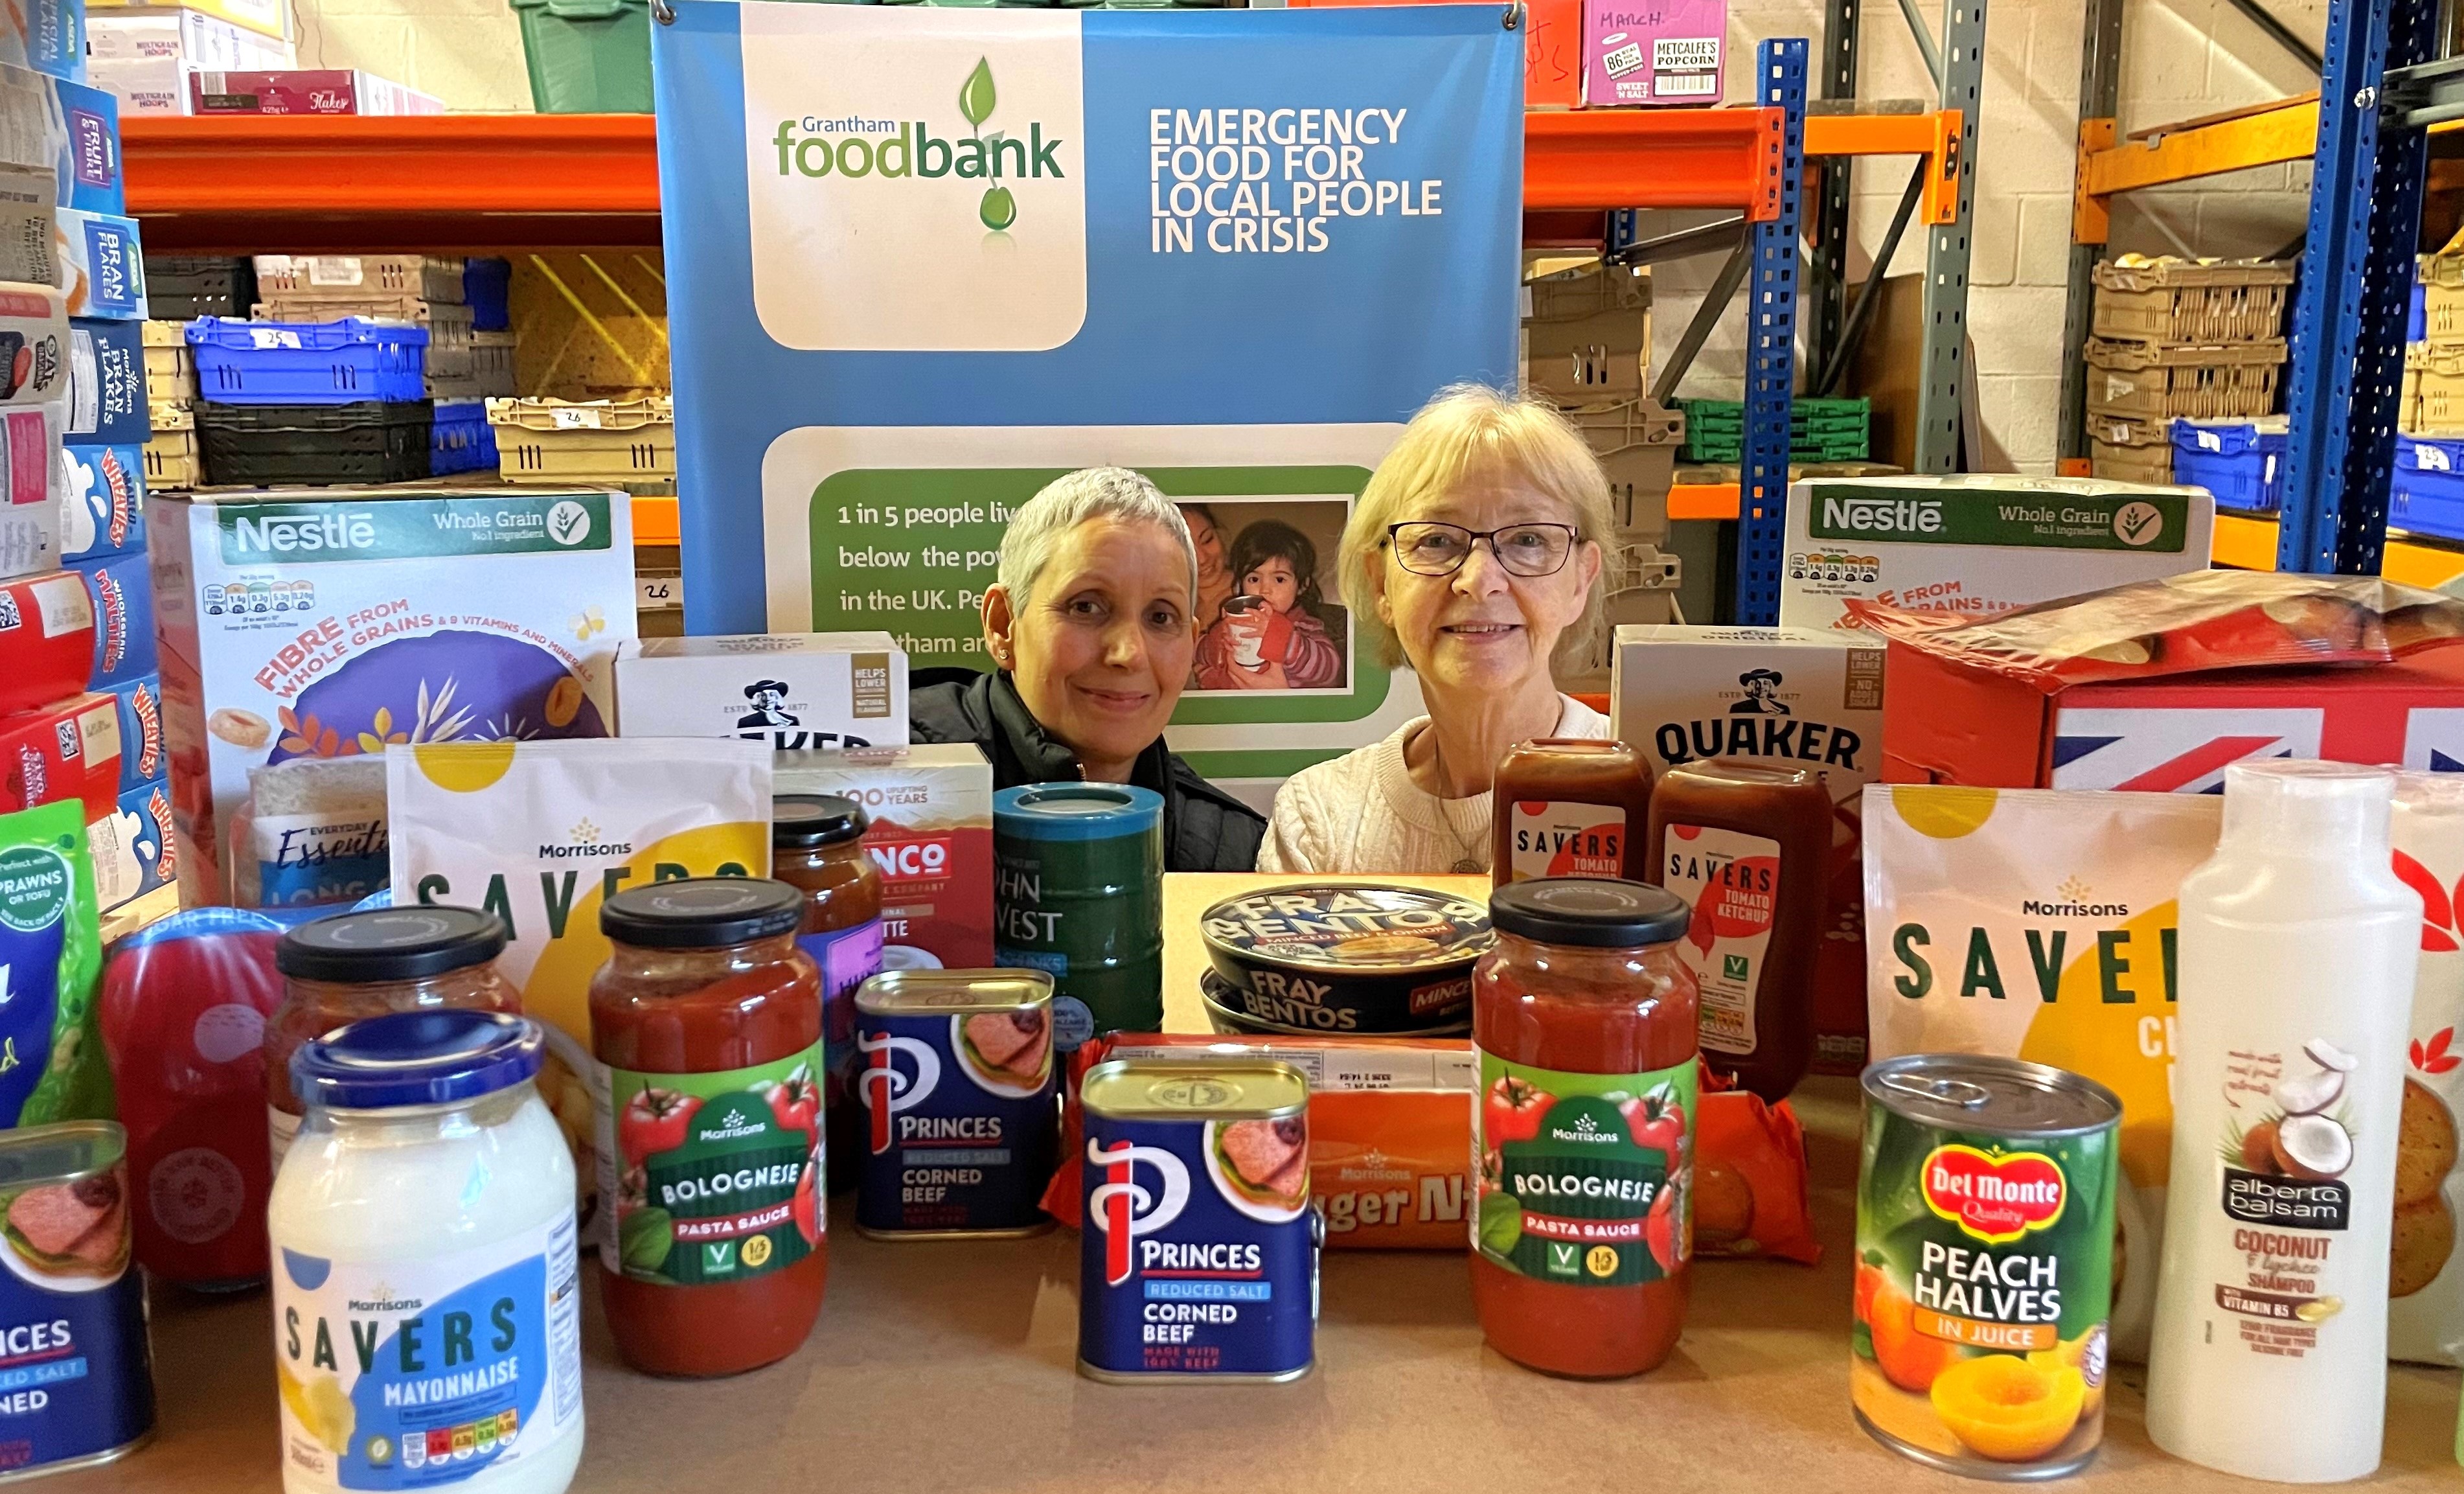 Jeanette Maddison (left) and Dorothy Gaughan at Grantham Foodbank.